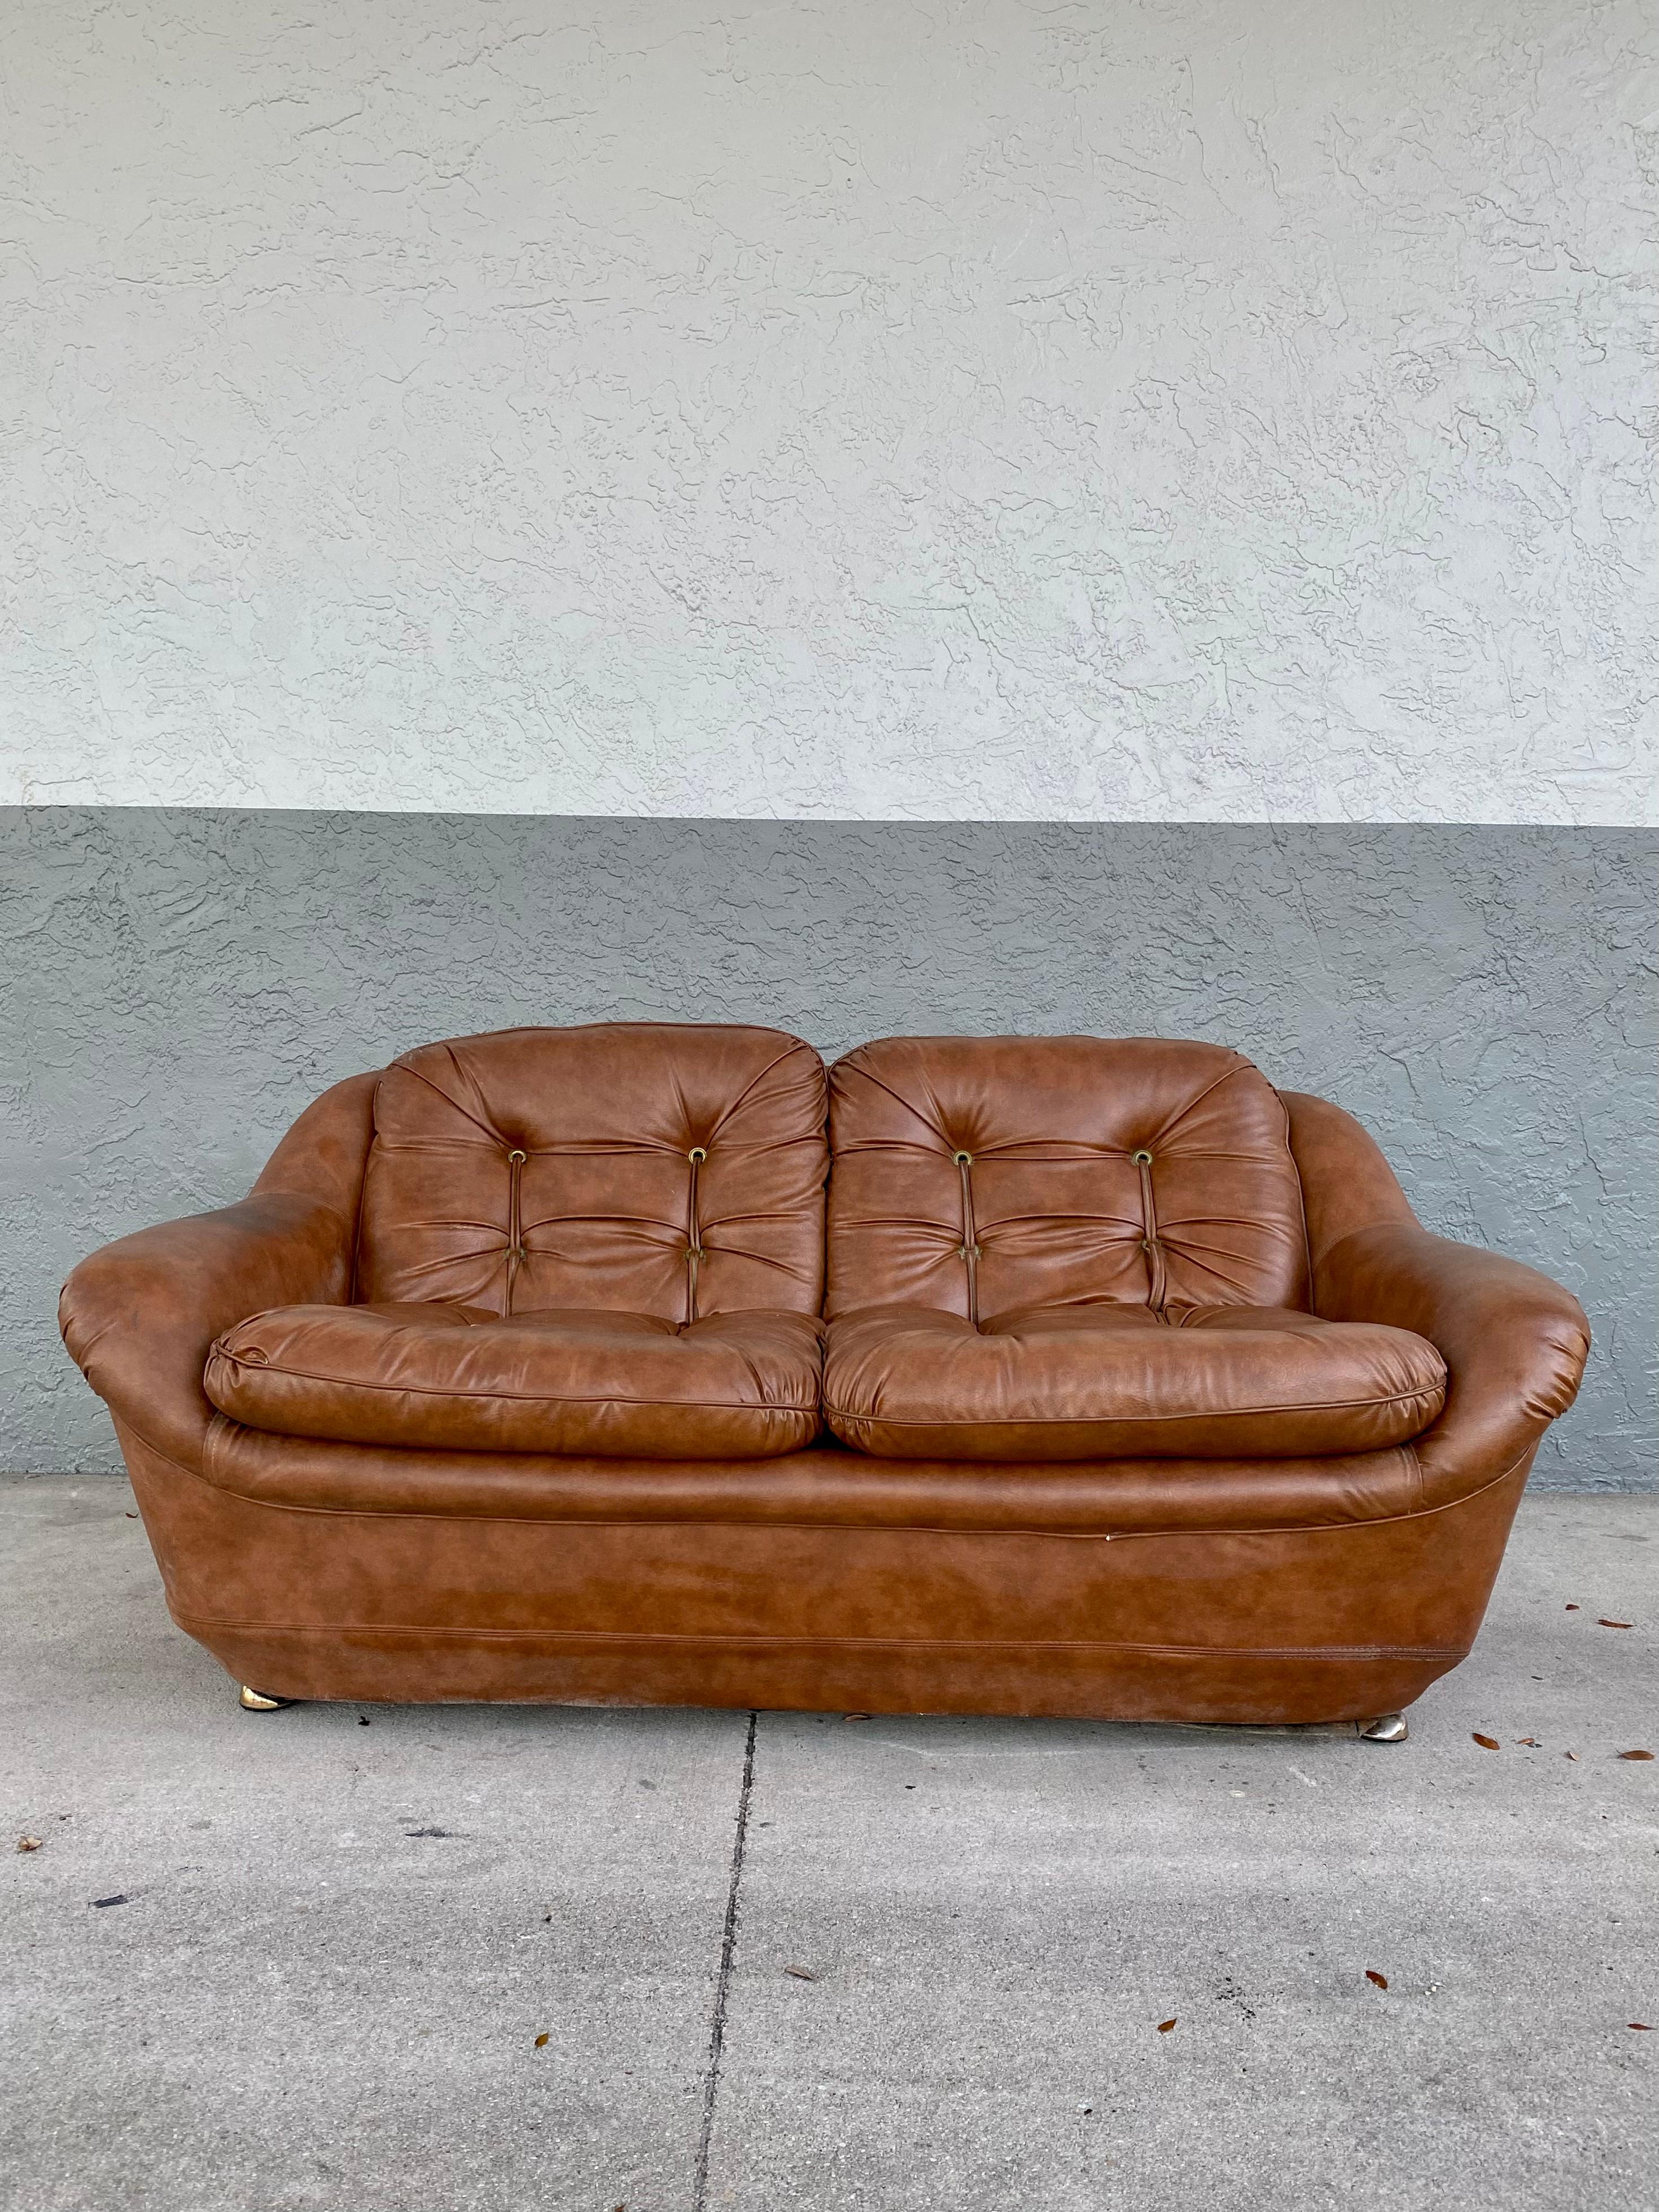 Rare and in original condition. Inherently stylish and intriguing! For your consideration is a sleek and stylish love seat sofa in the style of Michel Cadestin, circa 1970. Elegant from every angle-his best sofa design. Dripping with style makes